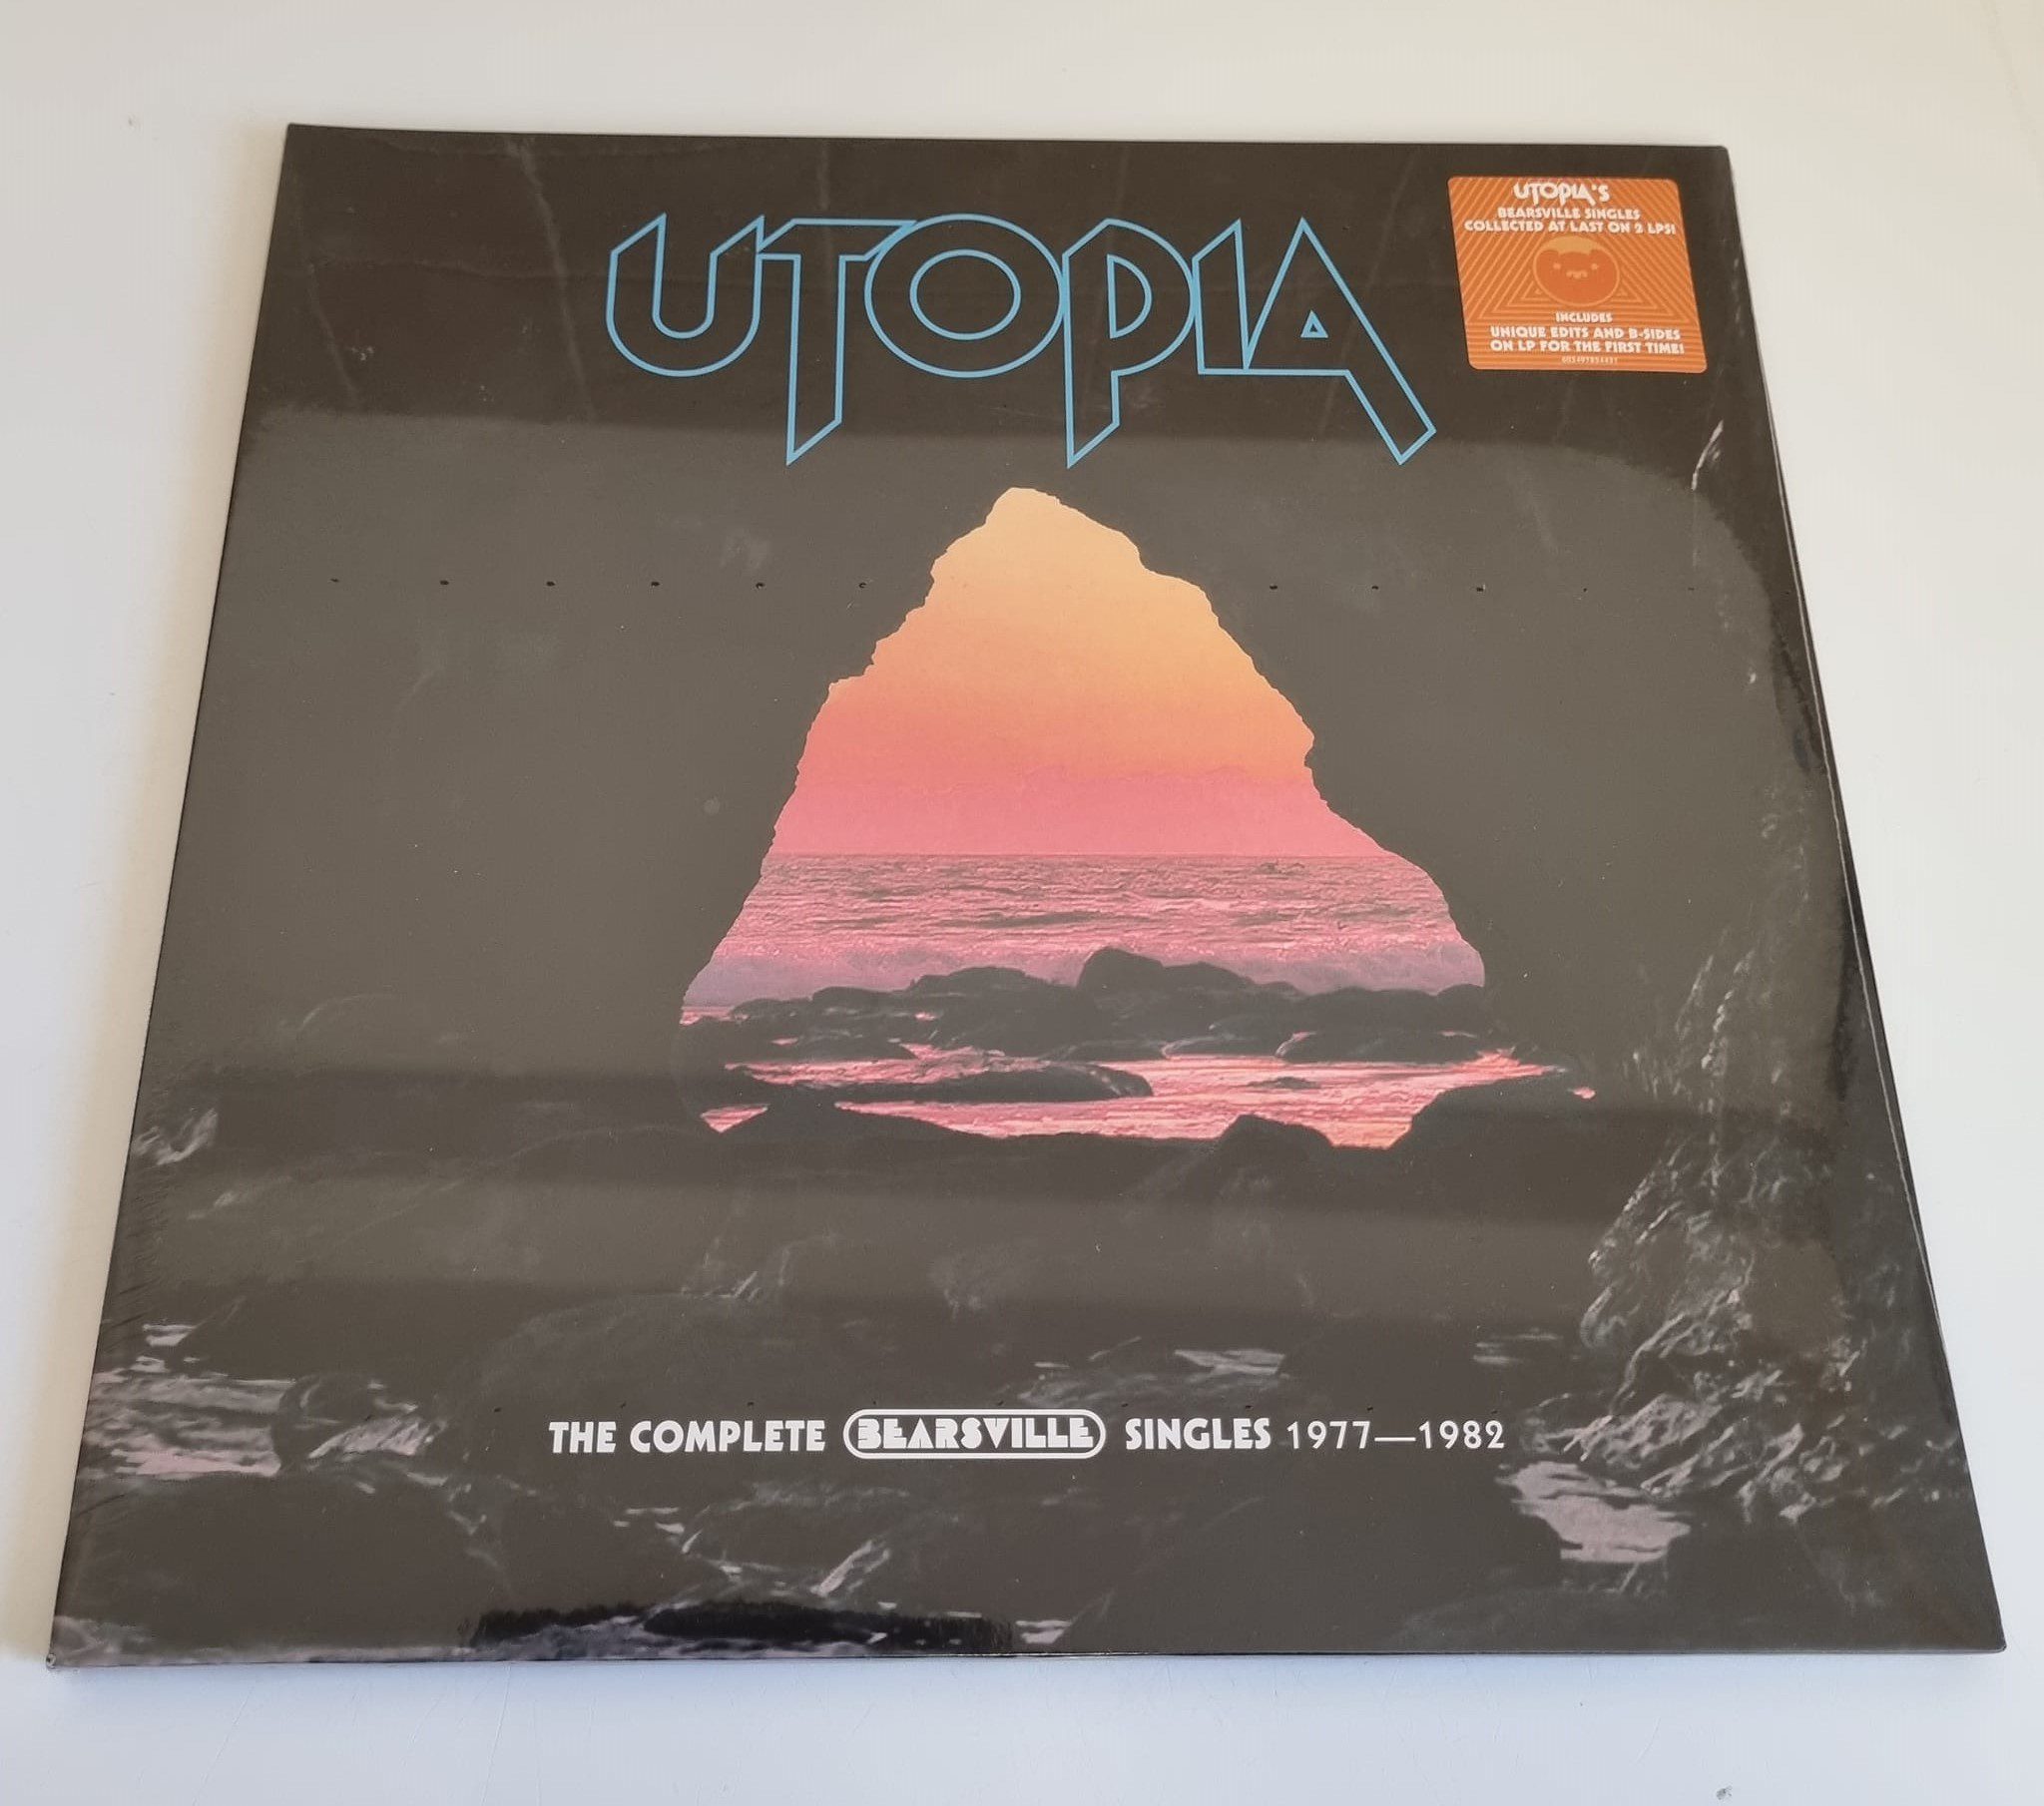 Buy this rare Utopia record by clicking here